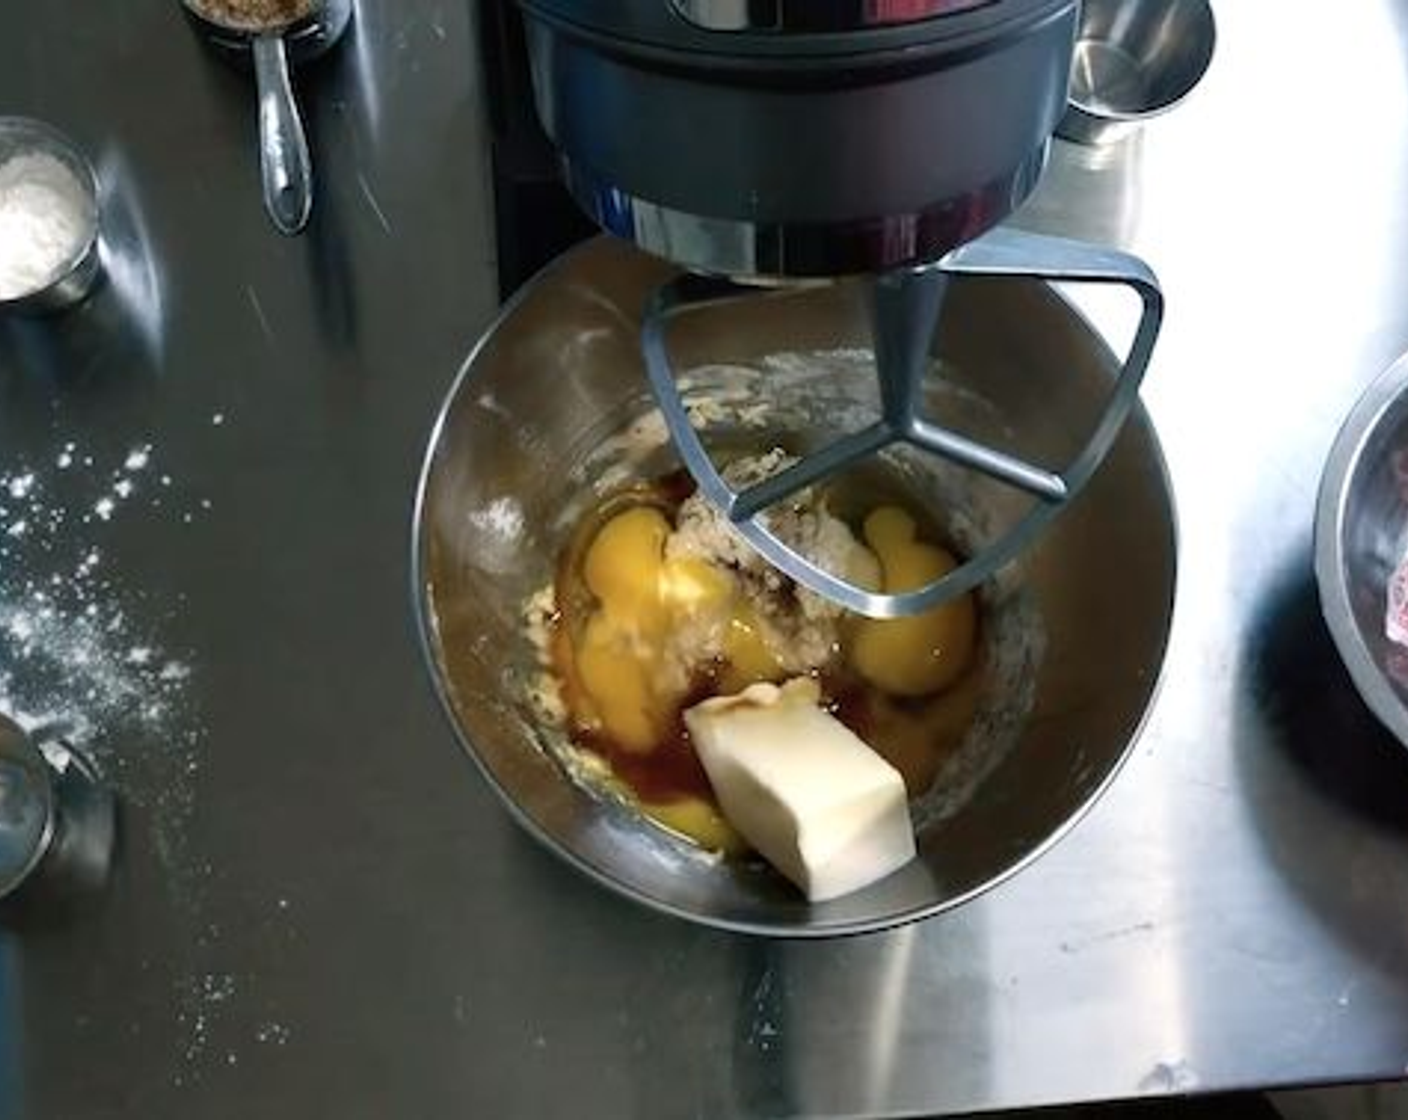 step 2 After it has rested add the Pineapple Juice (1/2 cup), Eggs (3), Brown Sugar (1/3 cup), Unsalted Butter (1/4 cup), Vanilla Extract (1 tsp), and mix until completely combined.